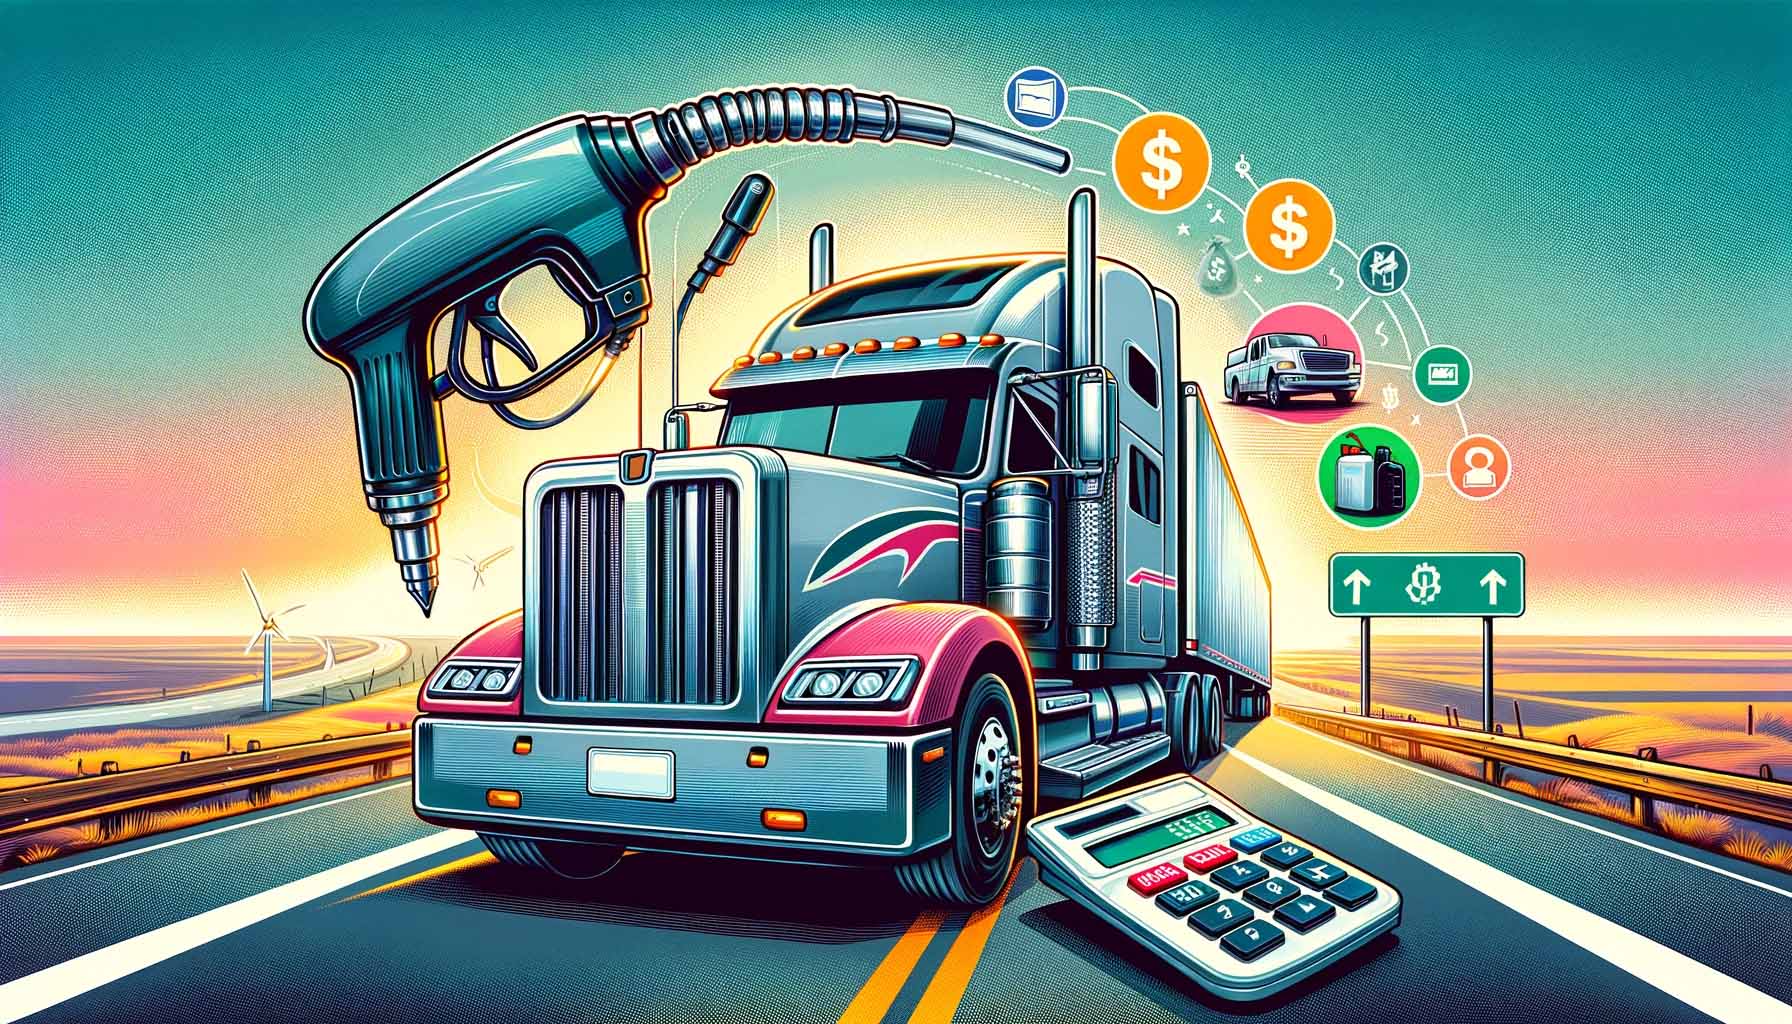 Illustration for a trucking industry article, featuring a semi-truck on a highway with a clear sky. The truck is prominent in the foreground, symboliz